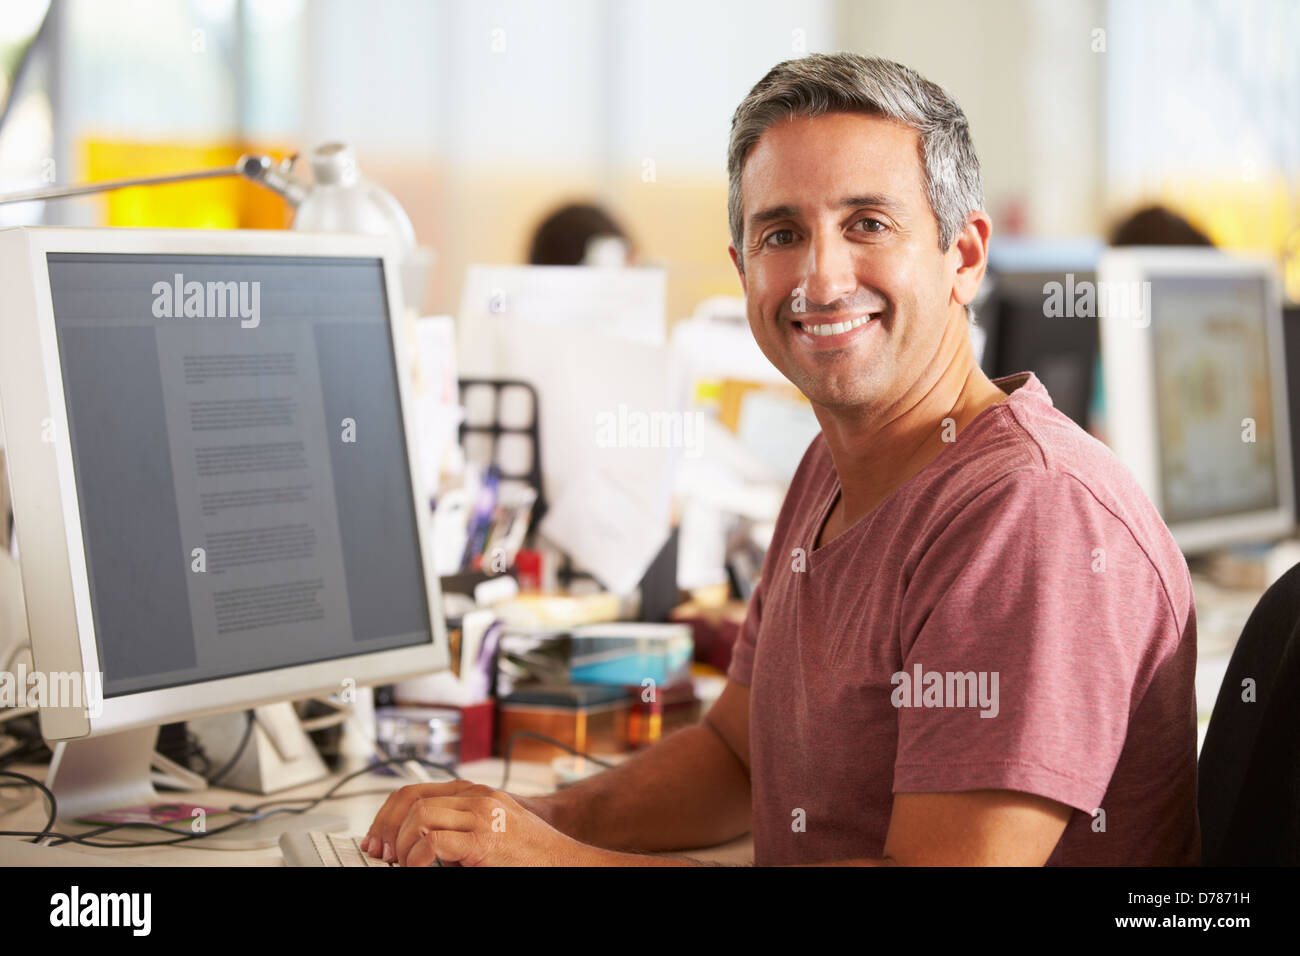 Man Working At Desk In Busy Creative Office Stock Photo